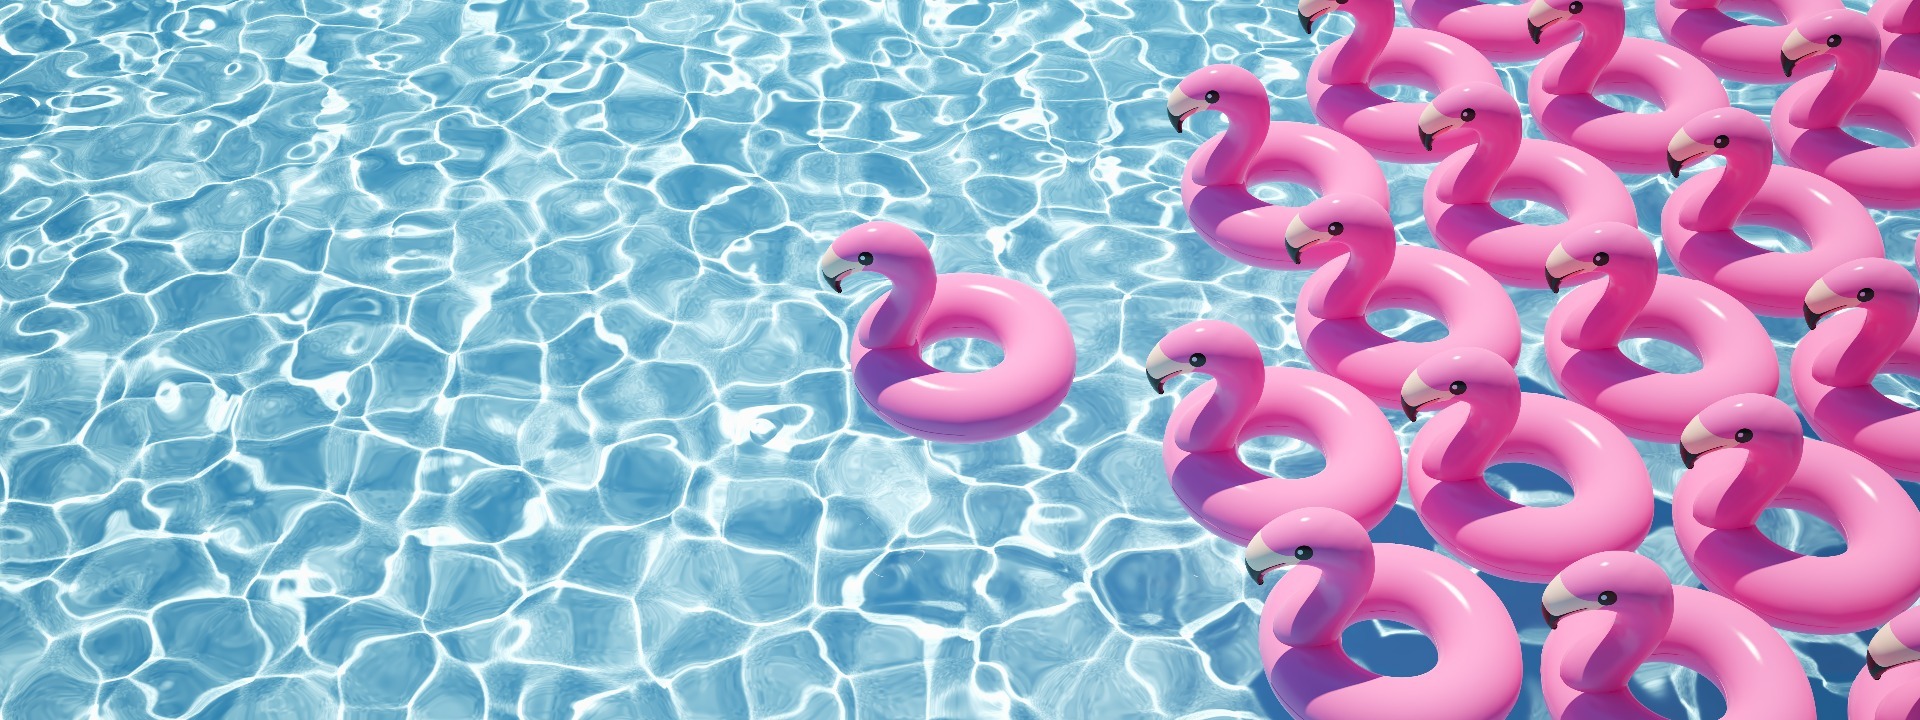 A pool of clear, blue water, with over 10 flamingo floats floating on top.